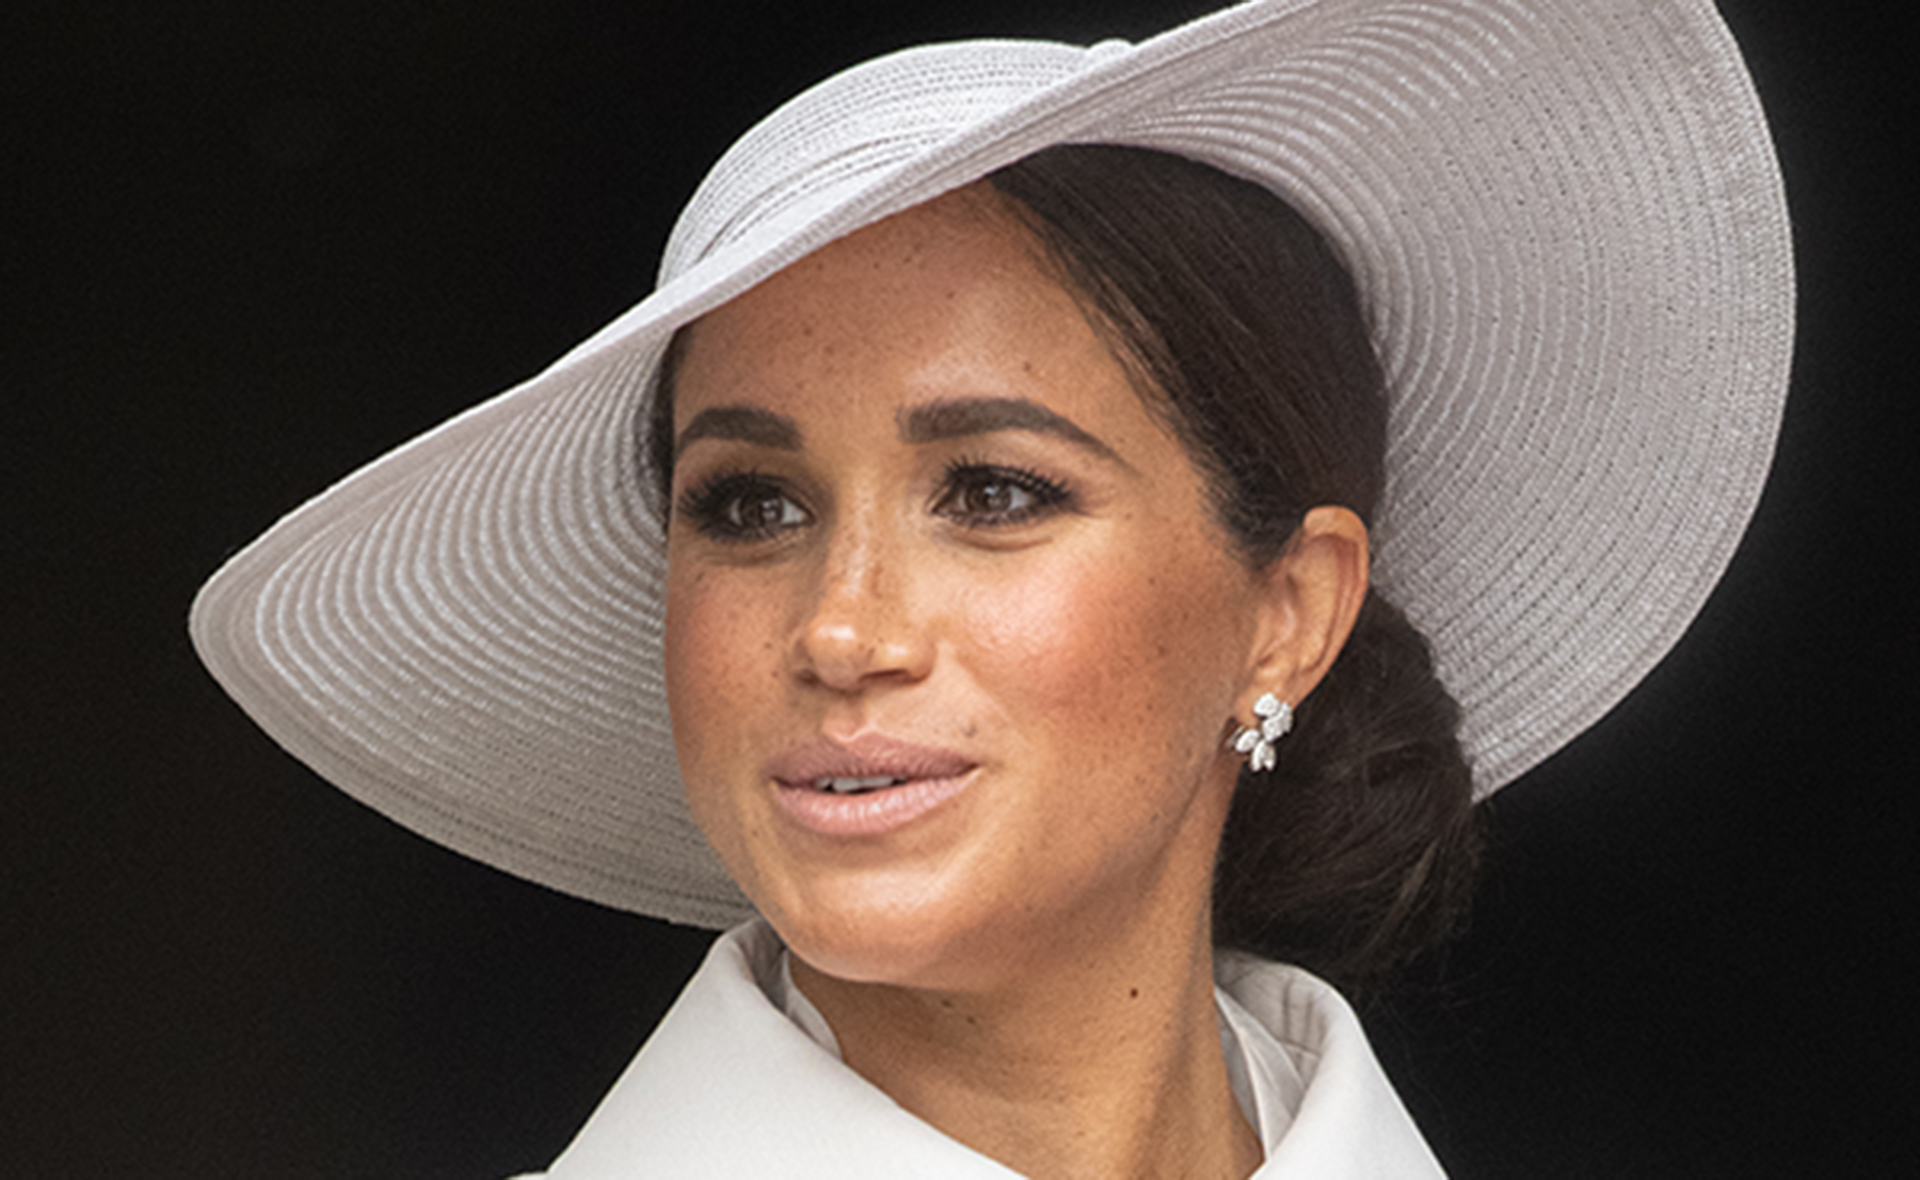 Royal expert slams Meghan Markle’s “outlandish” claims the British tabloids called her kids the N-word